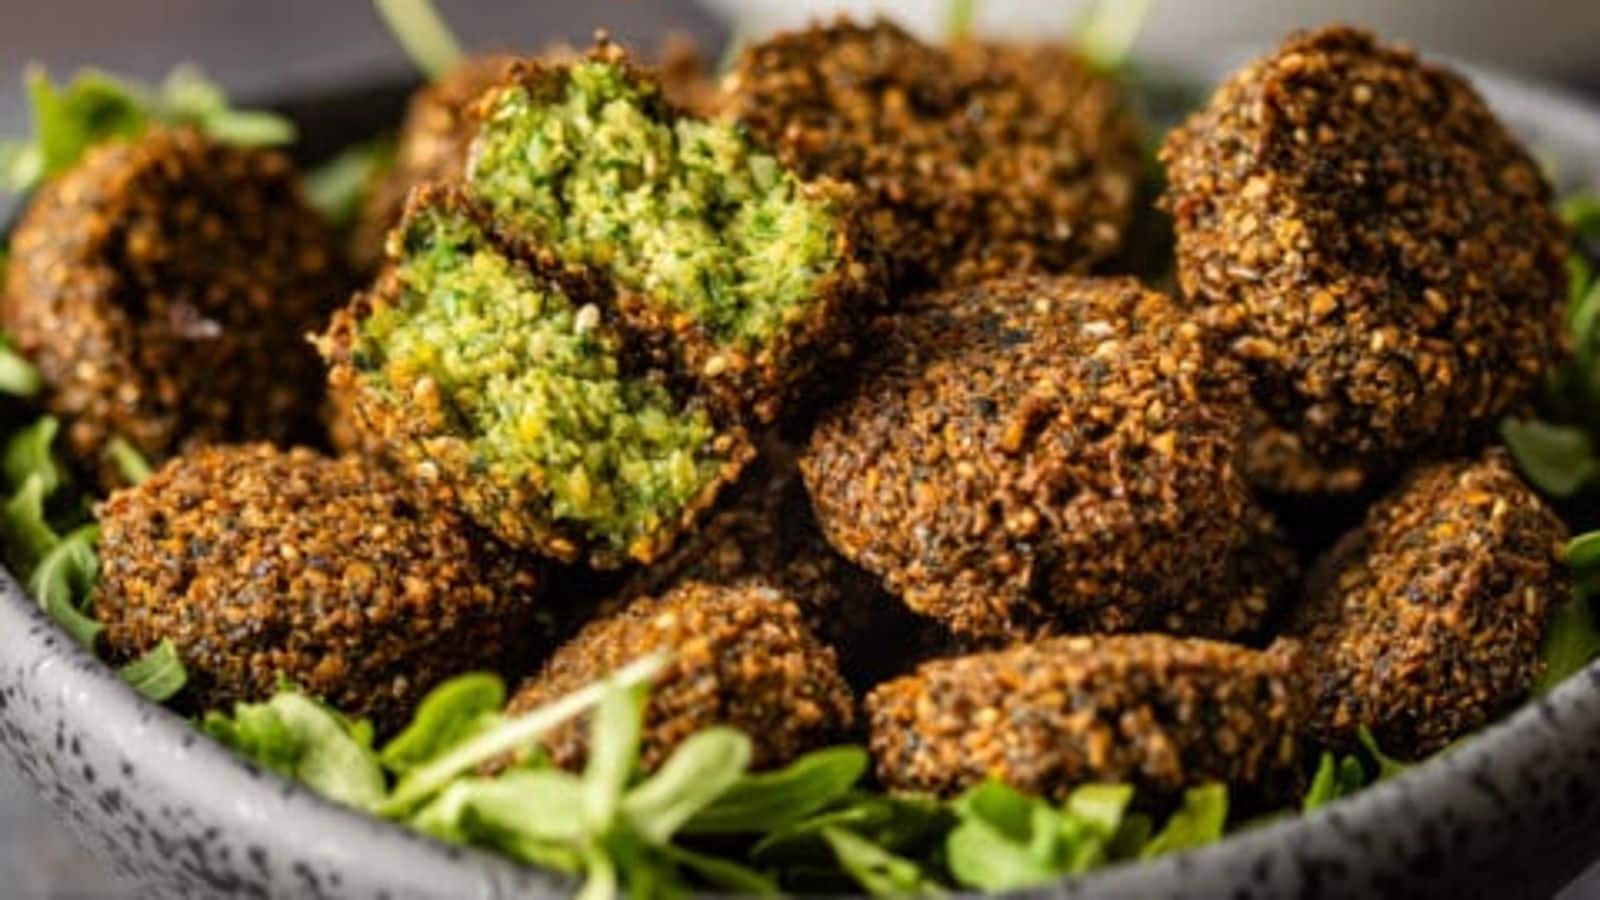 A step-by-step guide to making crispy falafel balls at home